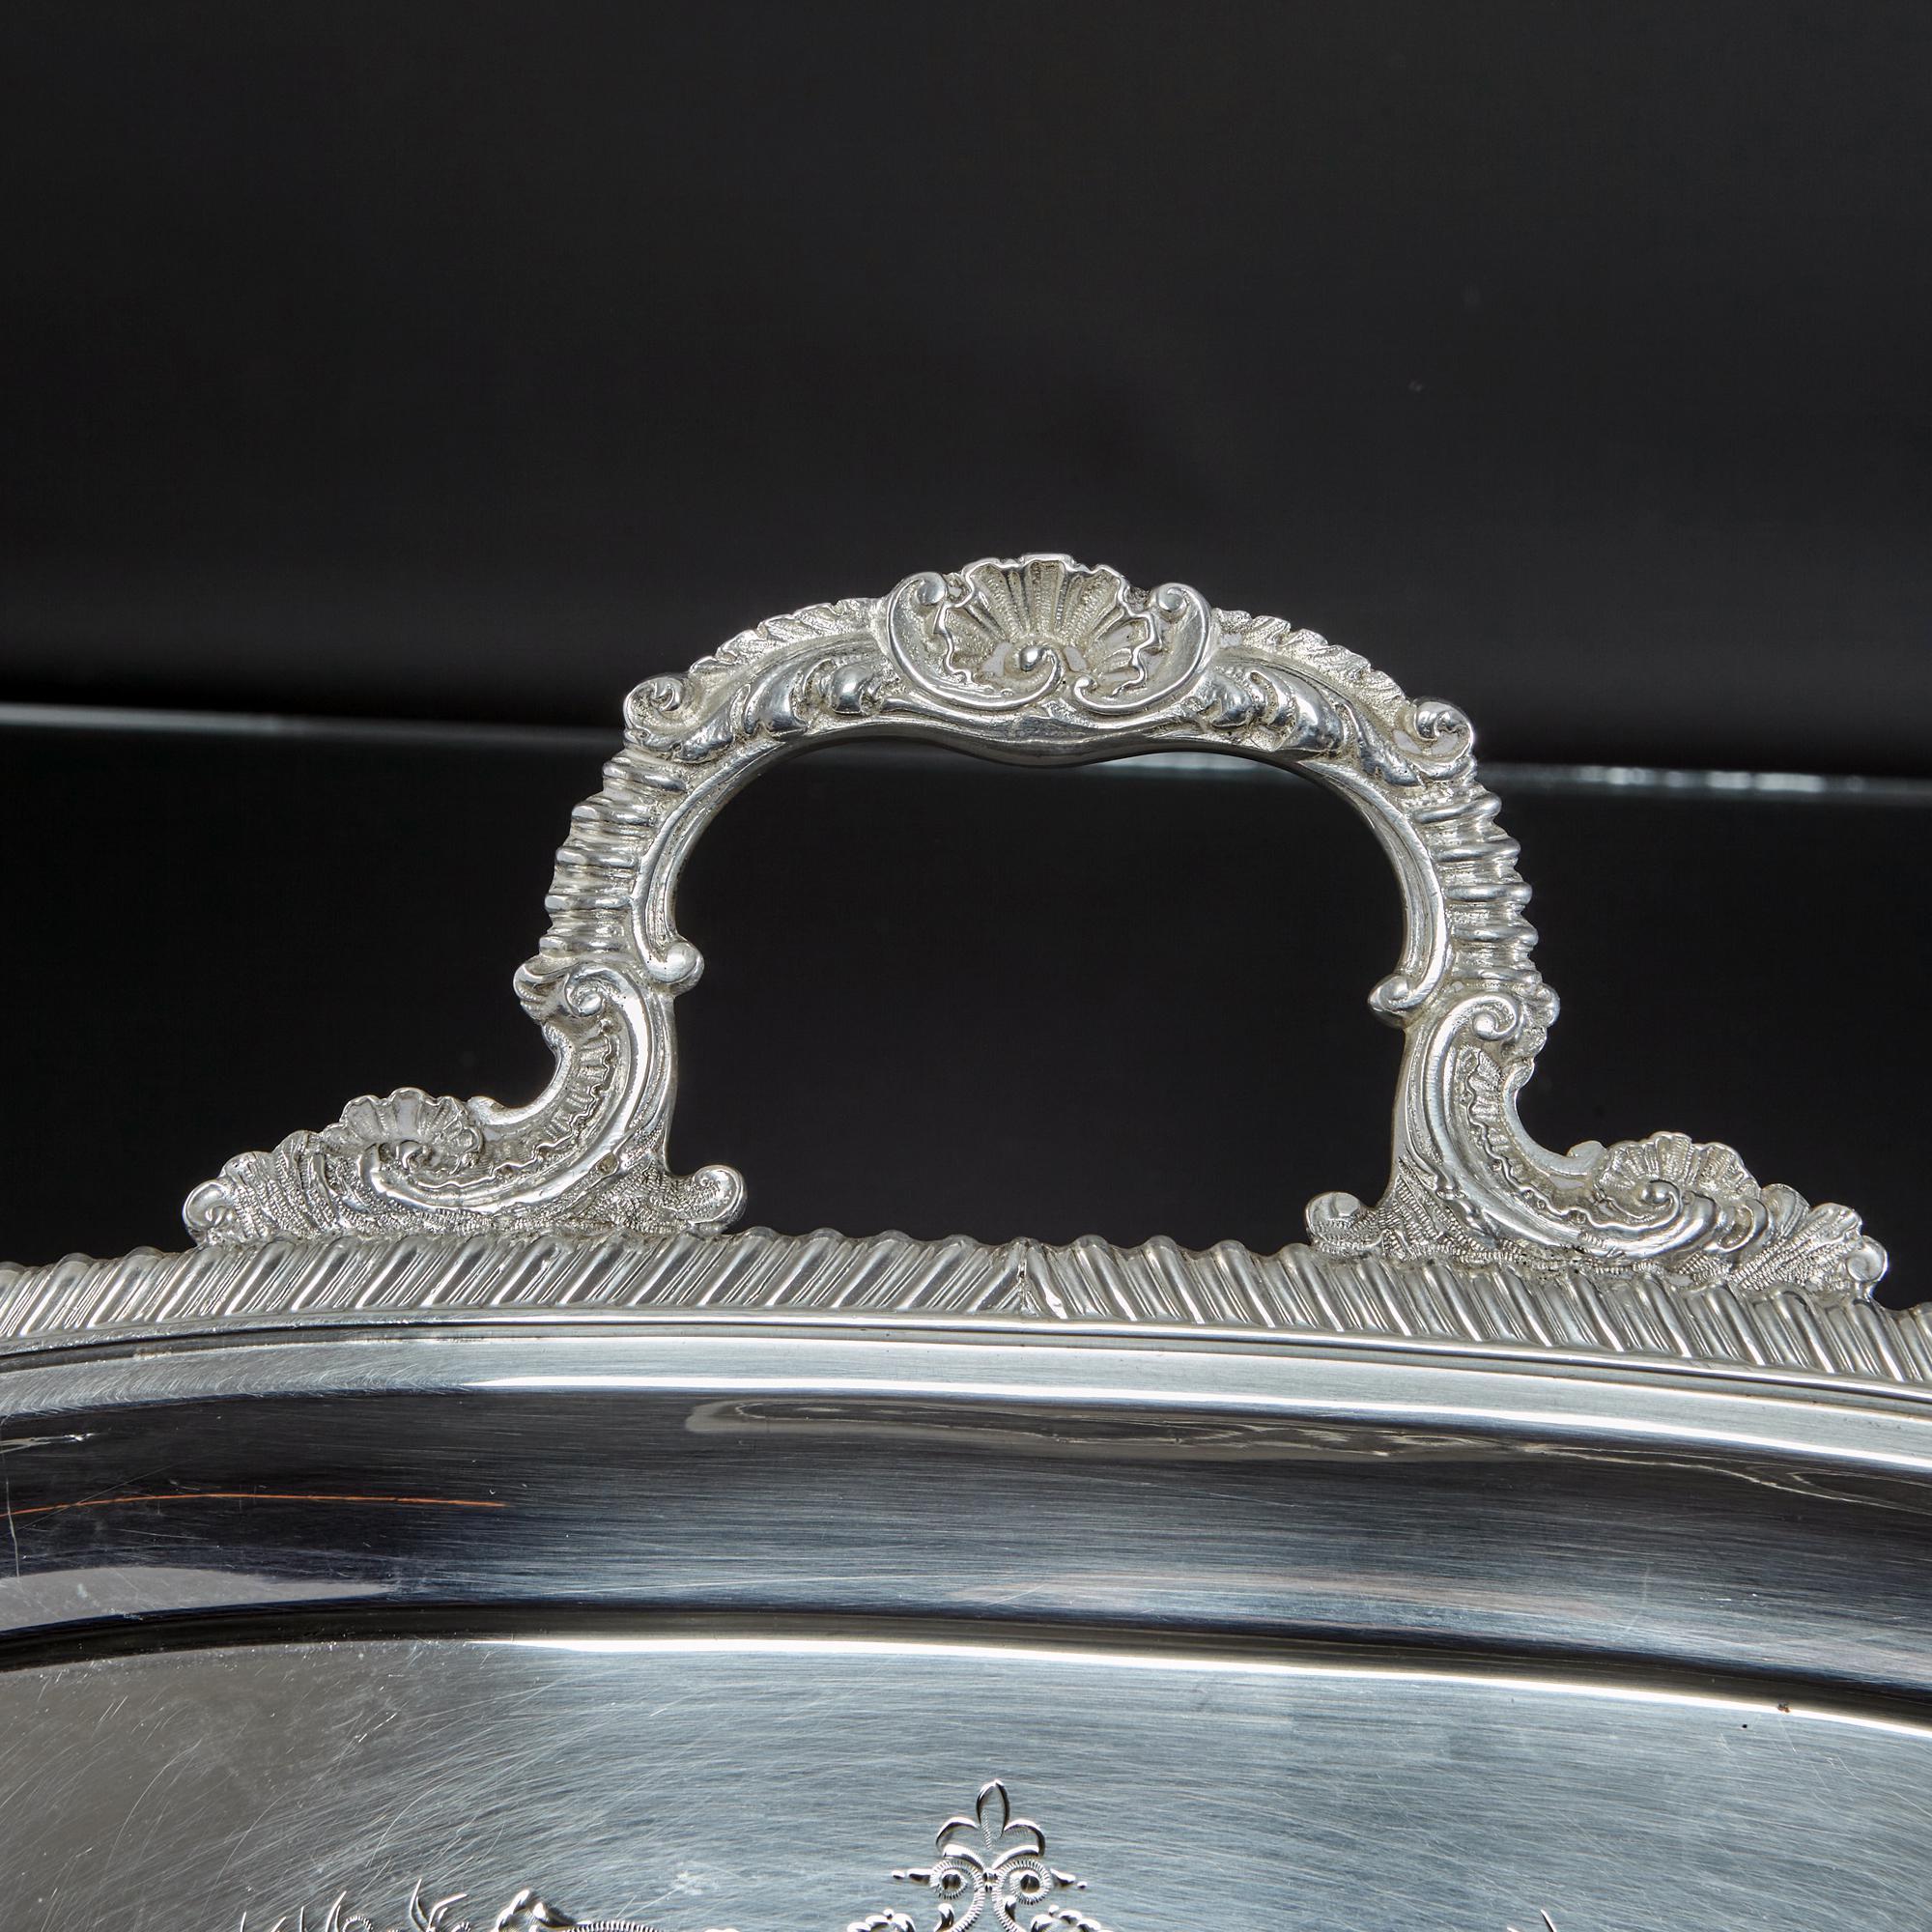 This rectangular antique Edwardian silver tray is impressive, featuring a crisply detailed gadroon border with shell, leaf and scroll corners and side mounts. The handles have similar detailing and the surface of the tray is hand engraved with